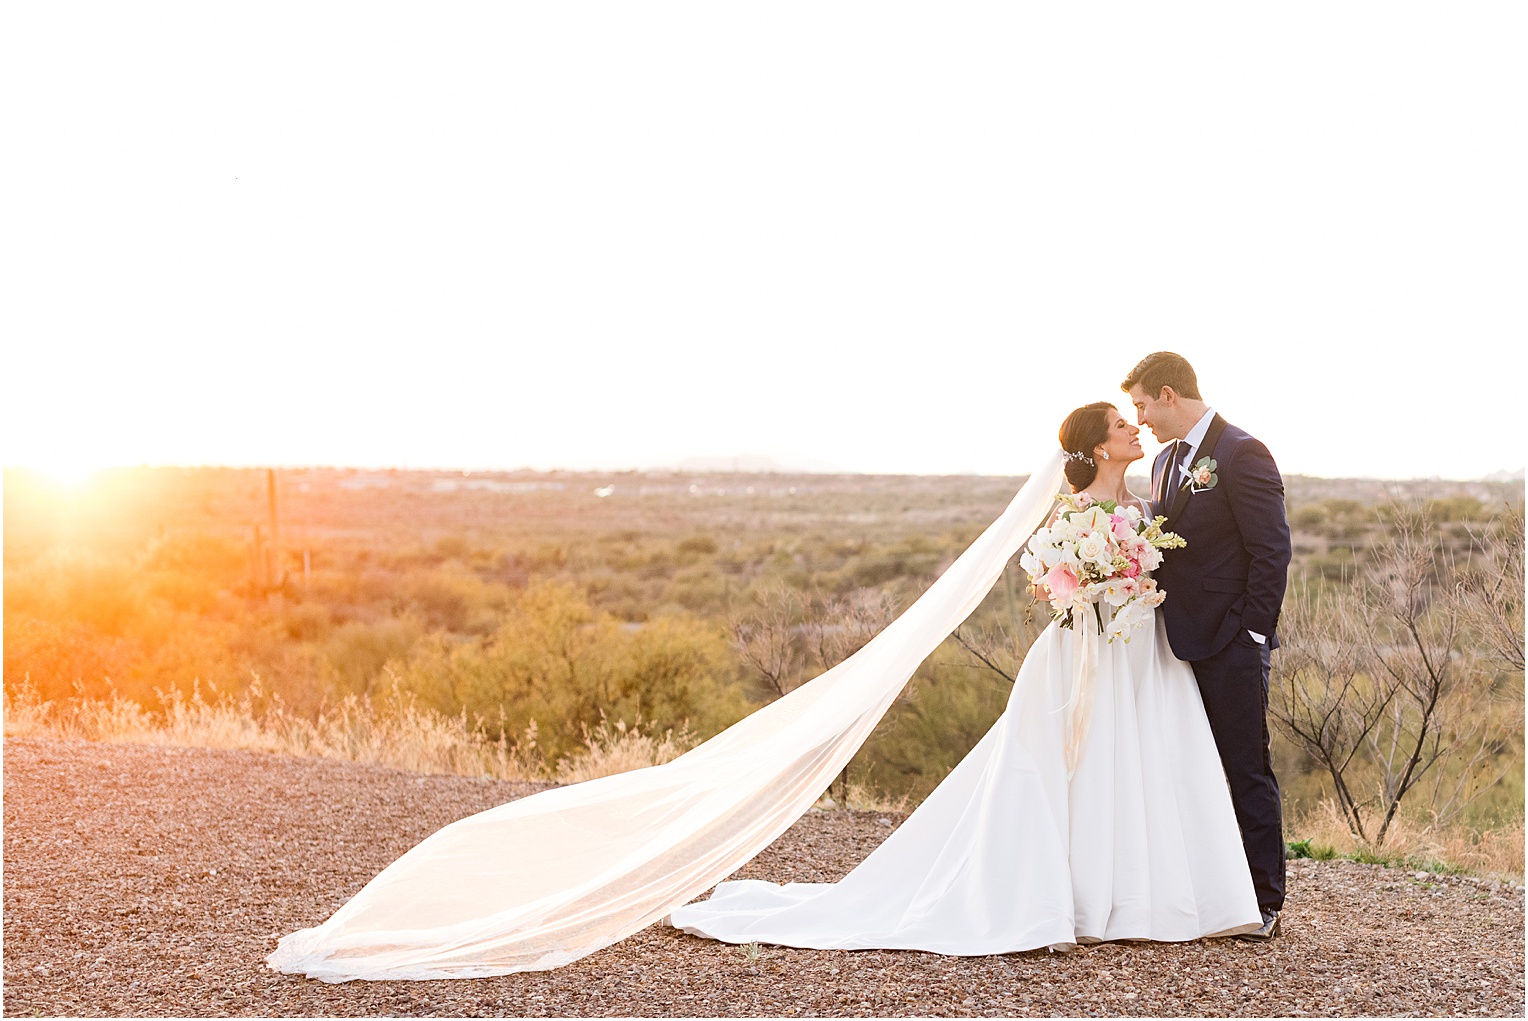 Saguaro Buttes Wedding Tucson, Arizona Farnaz & Brian romantic bride and groom pictures at sunset